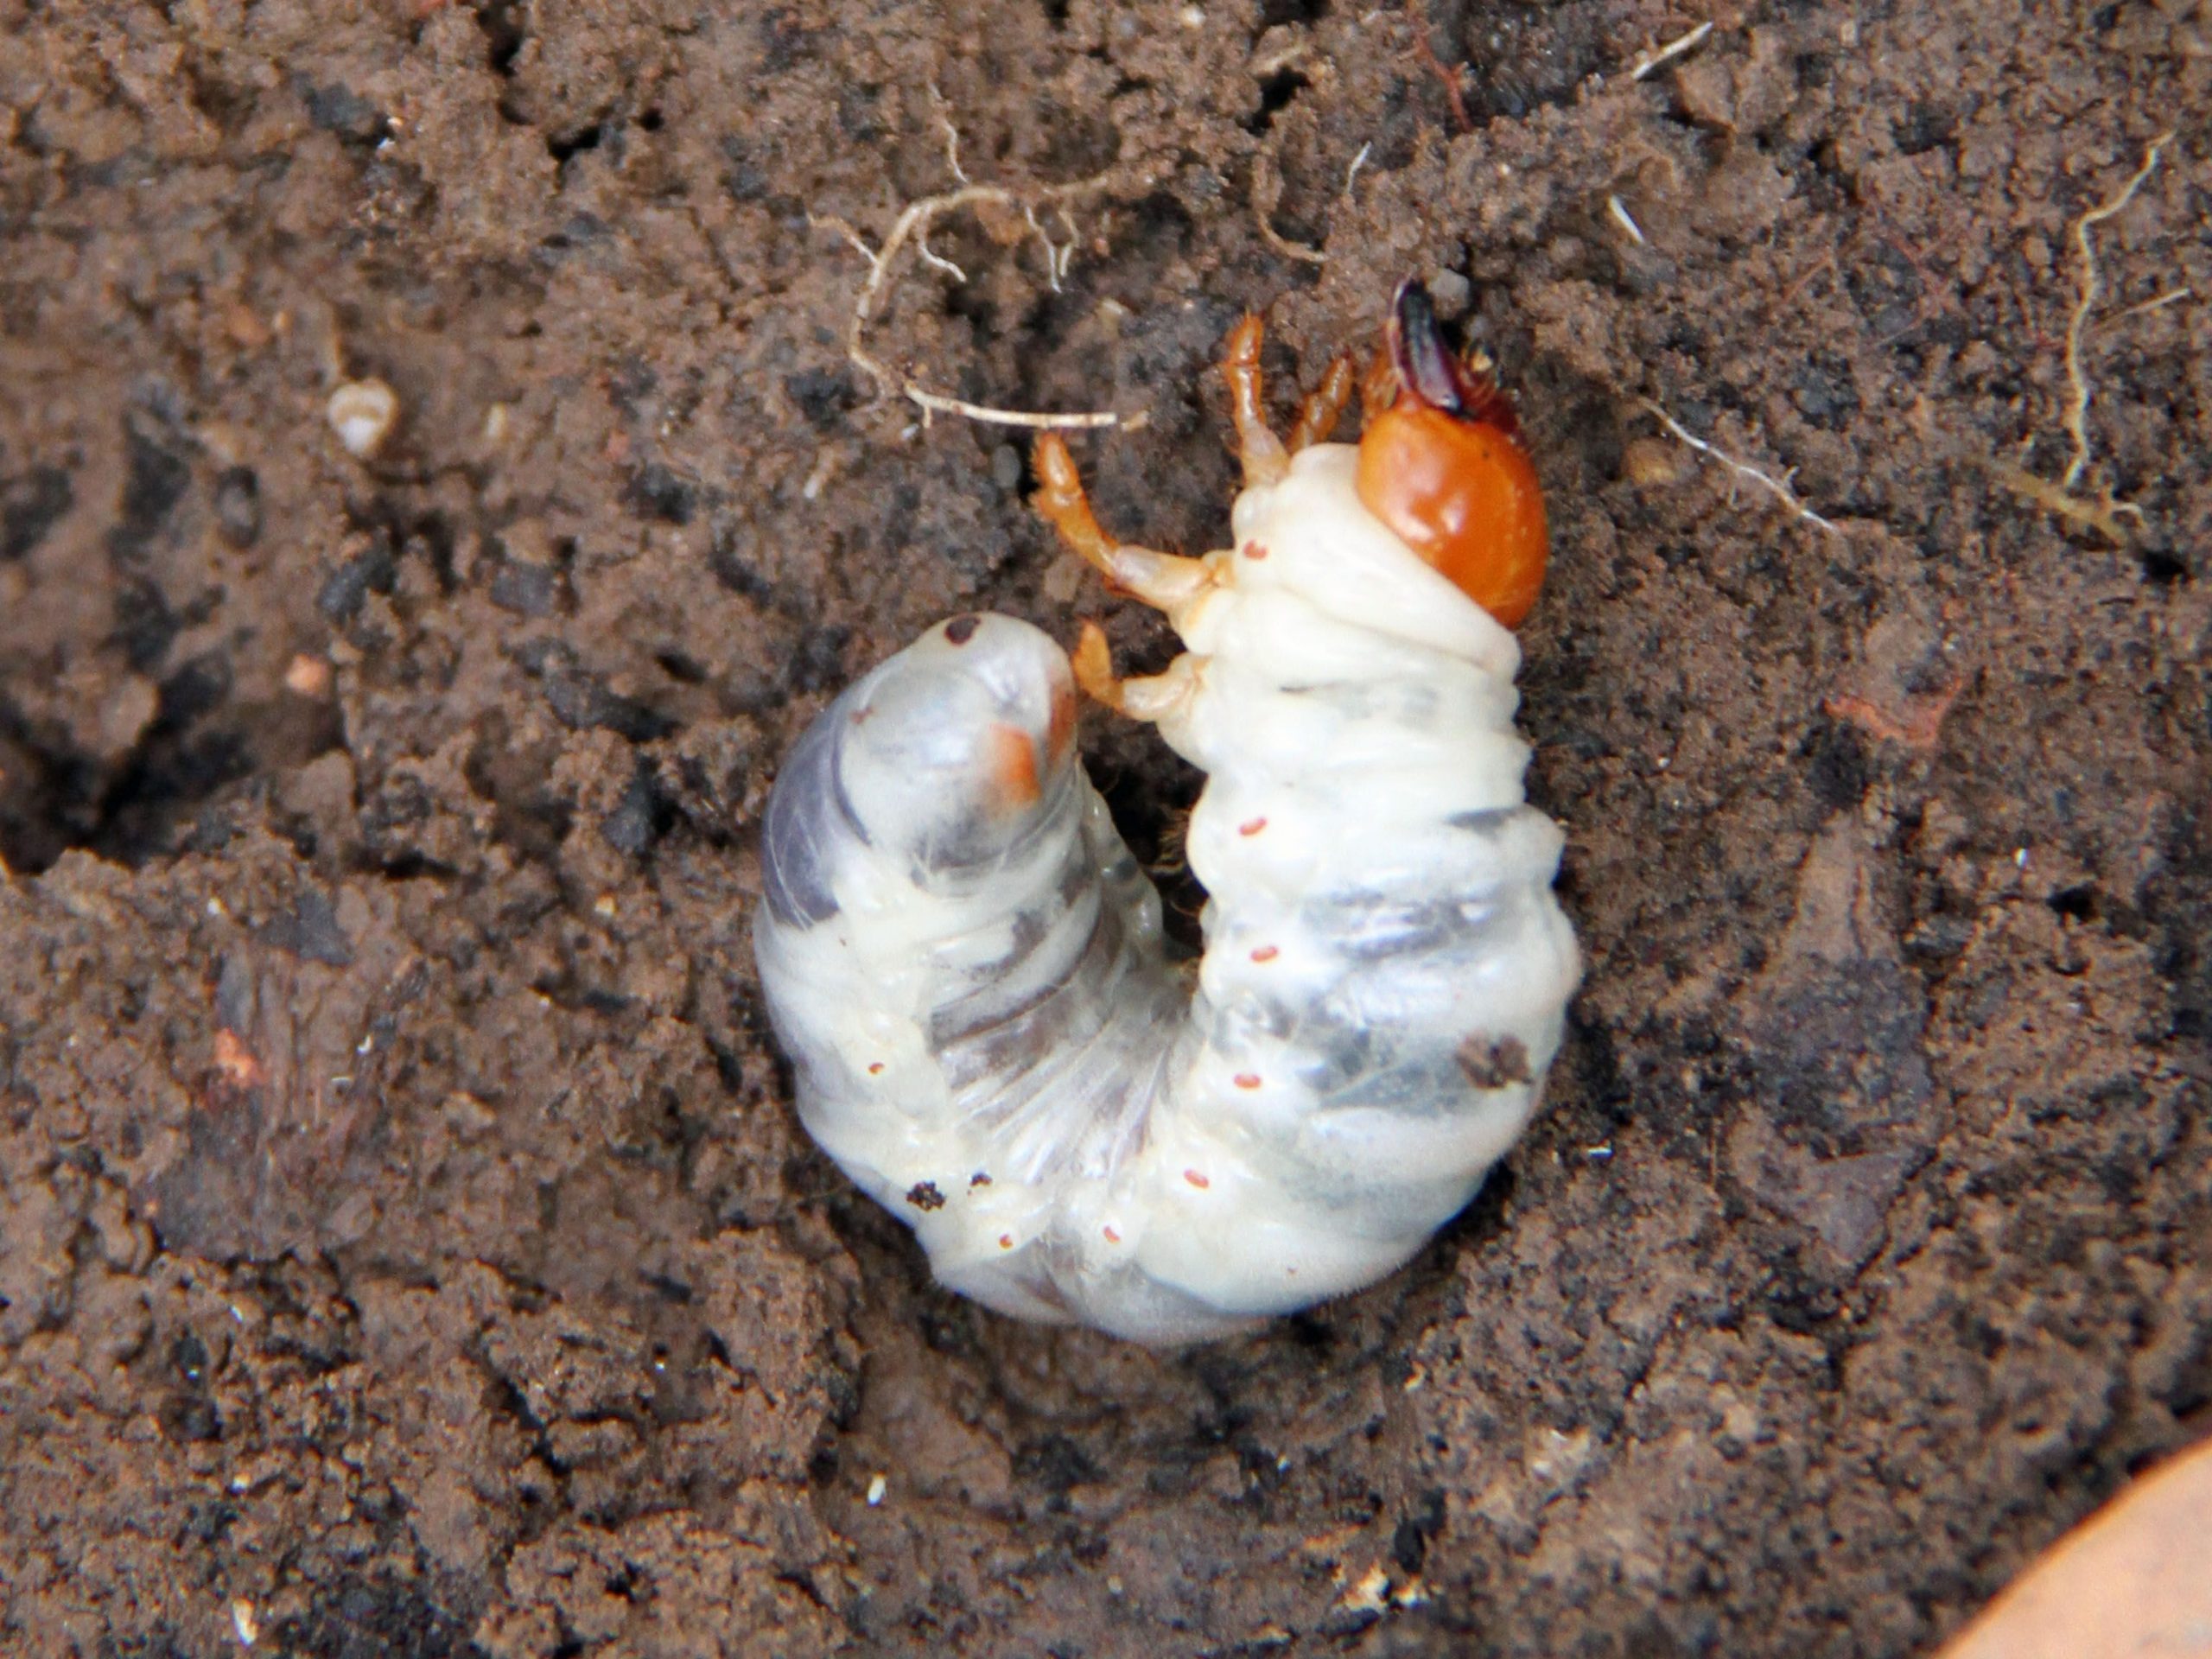 How to Prevent and Deal With Lawn Grubs